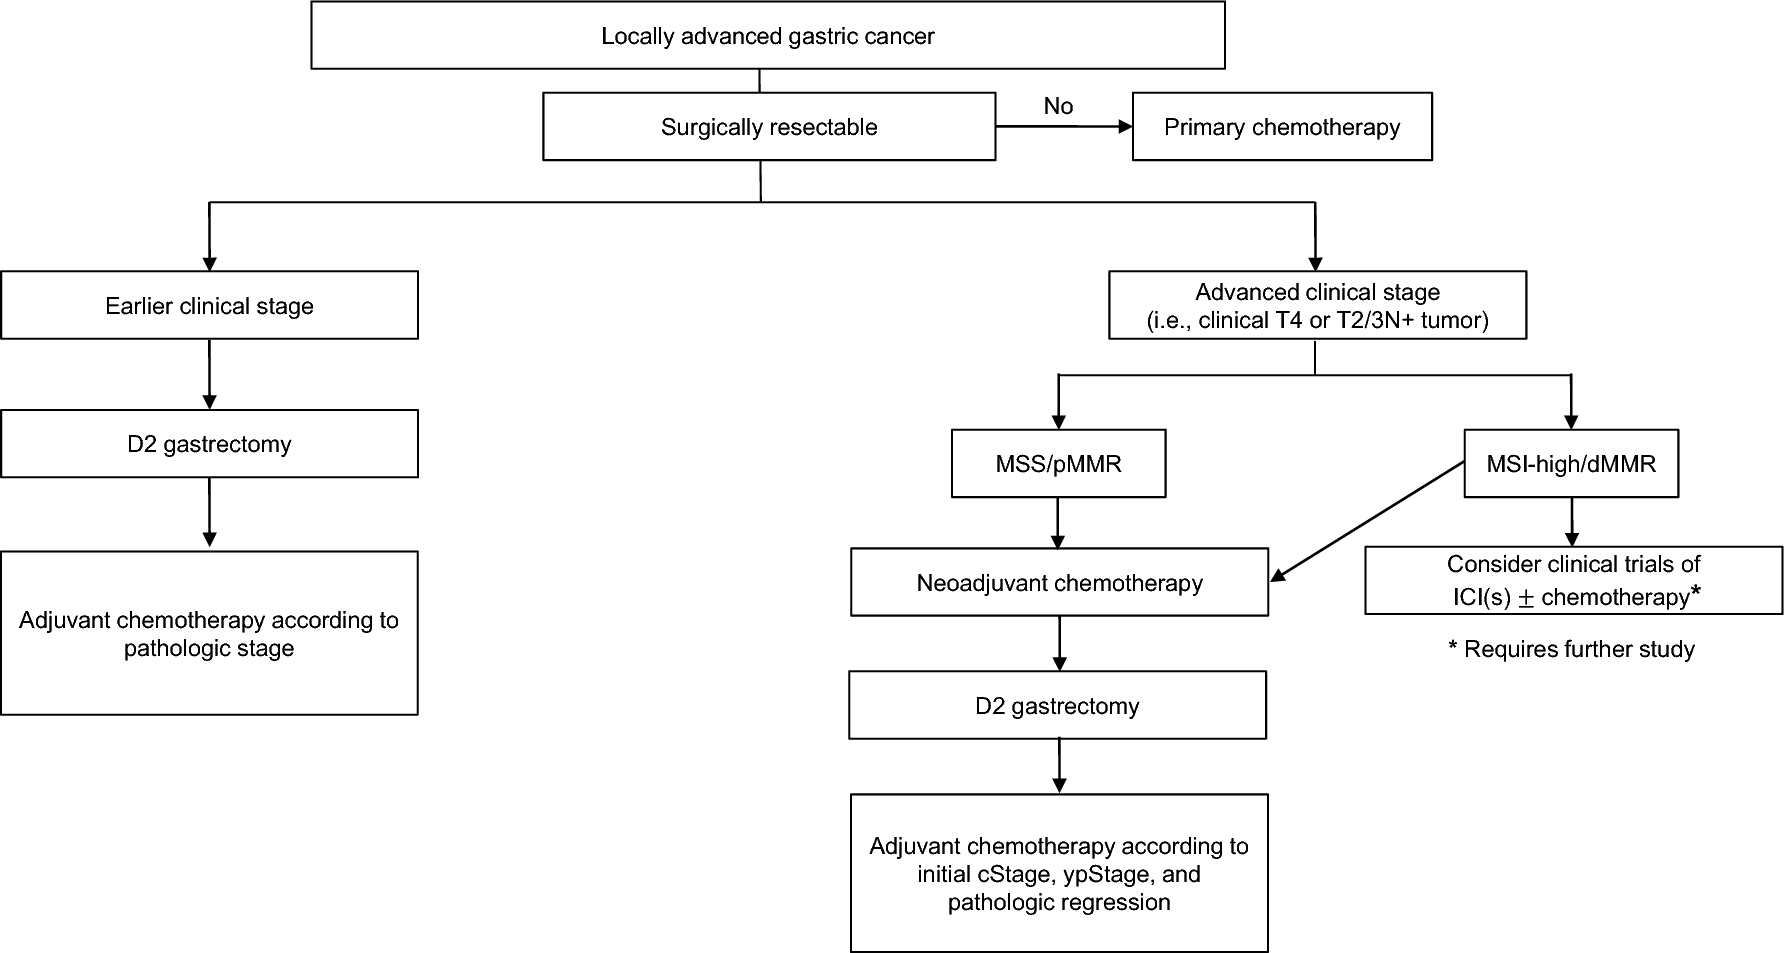 Adjuvant treatment for locally advanced gastric cancer: an Asian perspective